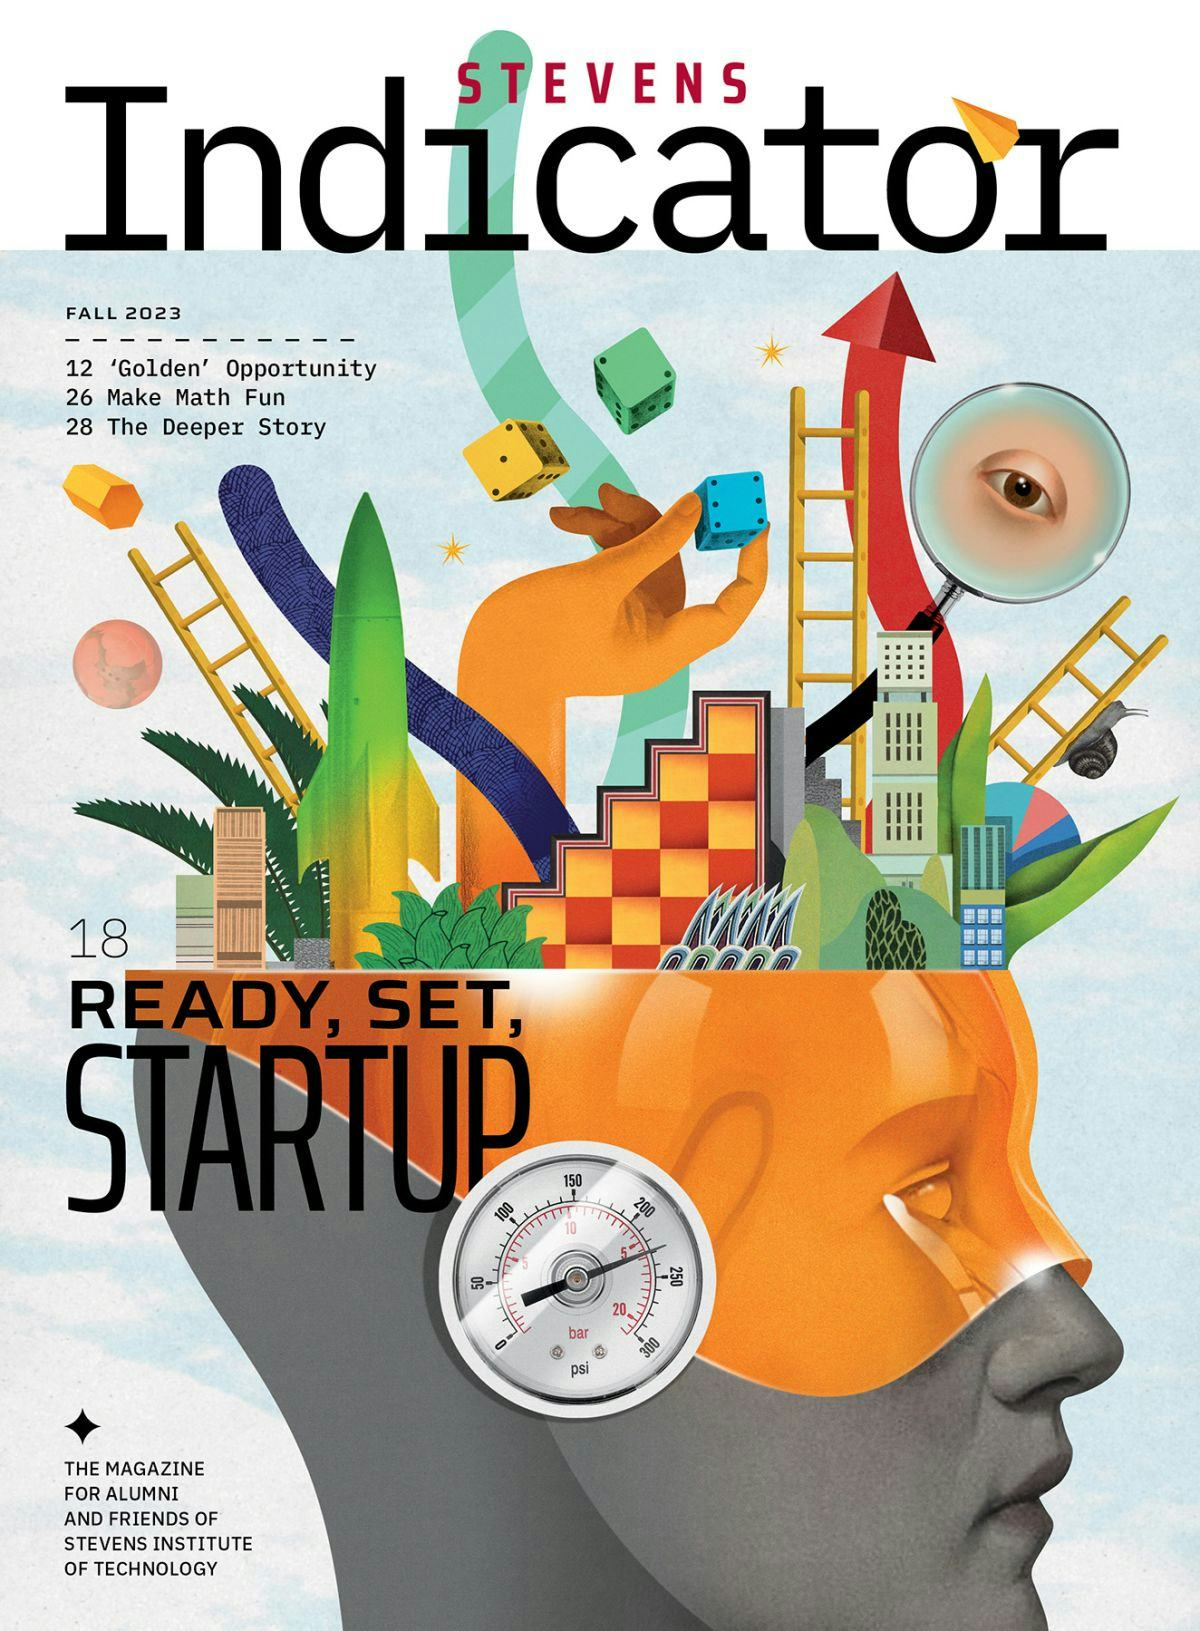 Cover of the Stevens indicator, showing a collage and the words "Ready, Set, Startup"